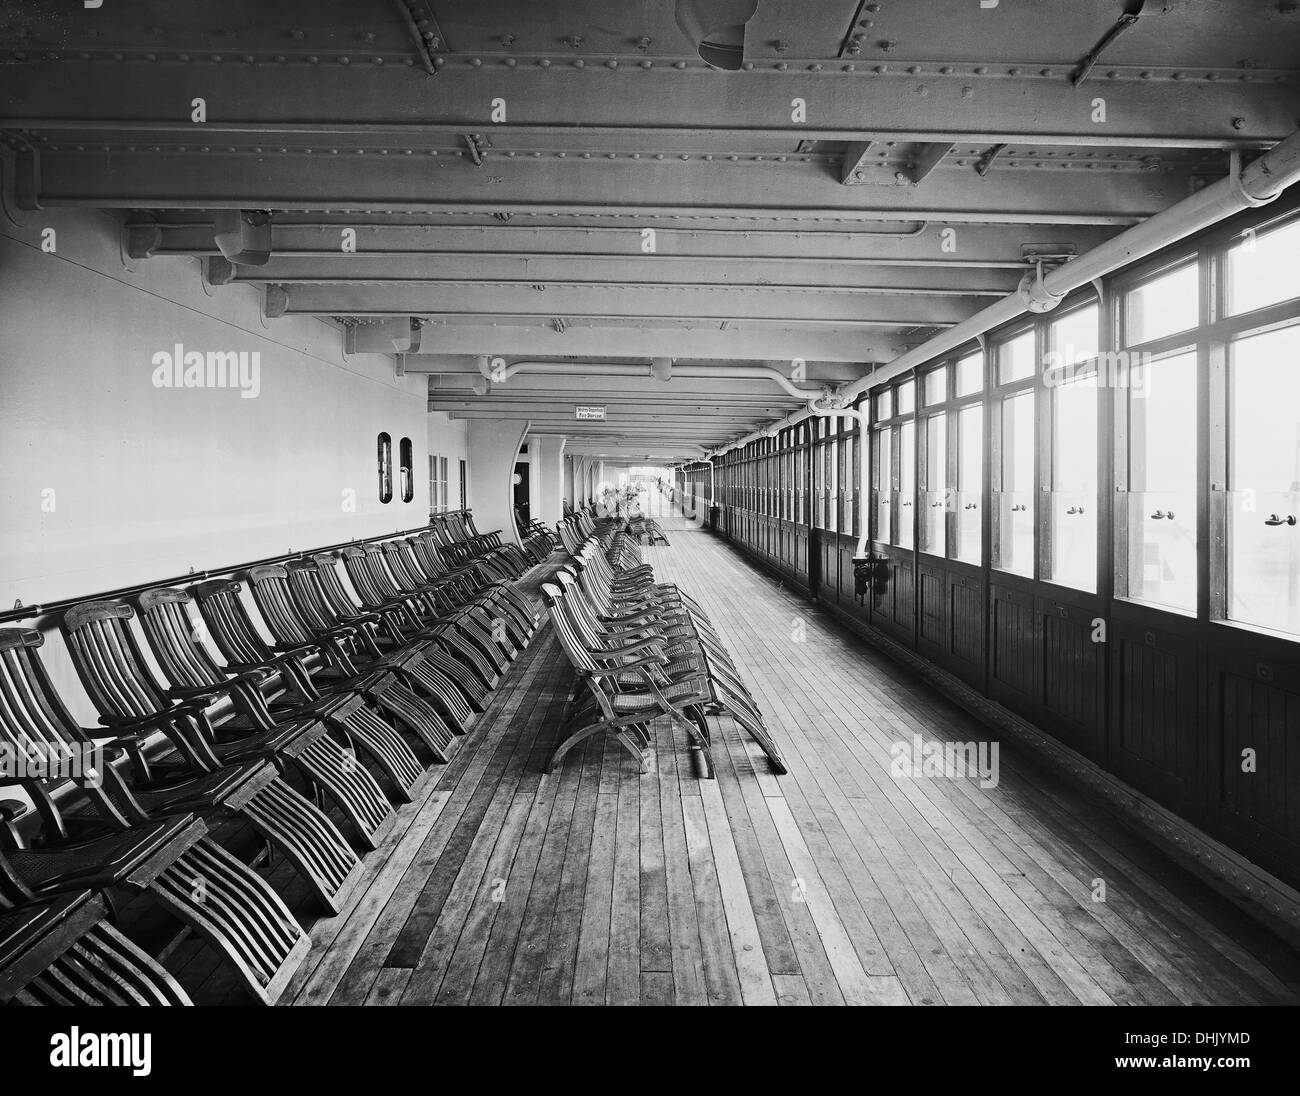 View along the rows of deckchairs of the glass gallery on the promenade deck of the ocean liner 'Imperator' of Hapag Hamburg (Hamburg America LIne), AG Vulcan Stettin, shipyard 1912, photograph taken in 1913/1914. The image was taken by the German photographer Oswald Lübeck, one of the earliest representatives of travel photography and ship photography aboard passenger ships. Photo: Deutsche Fotothek/Oswald Lübeck Stock Photo